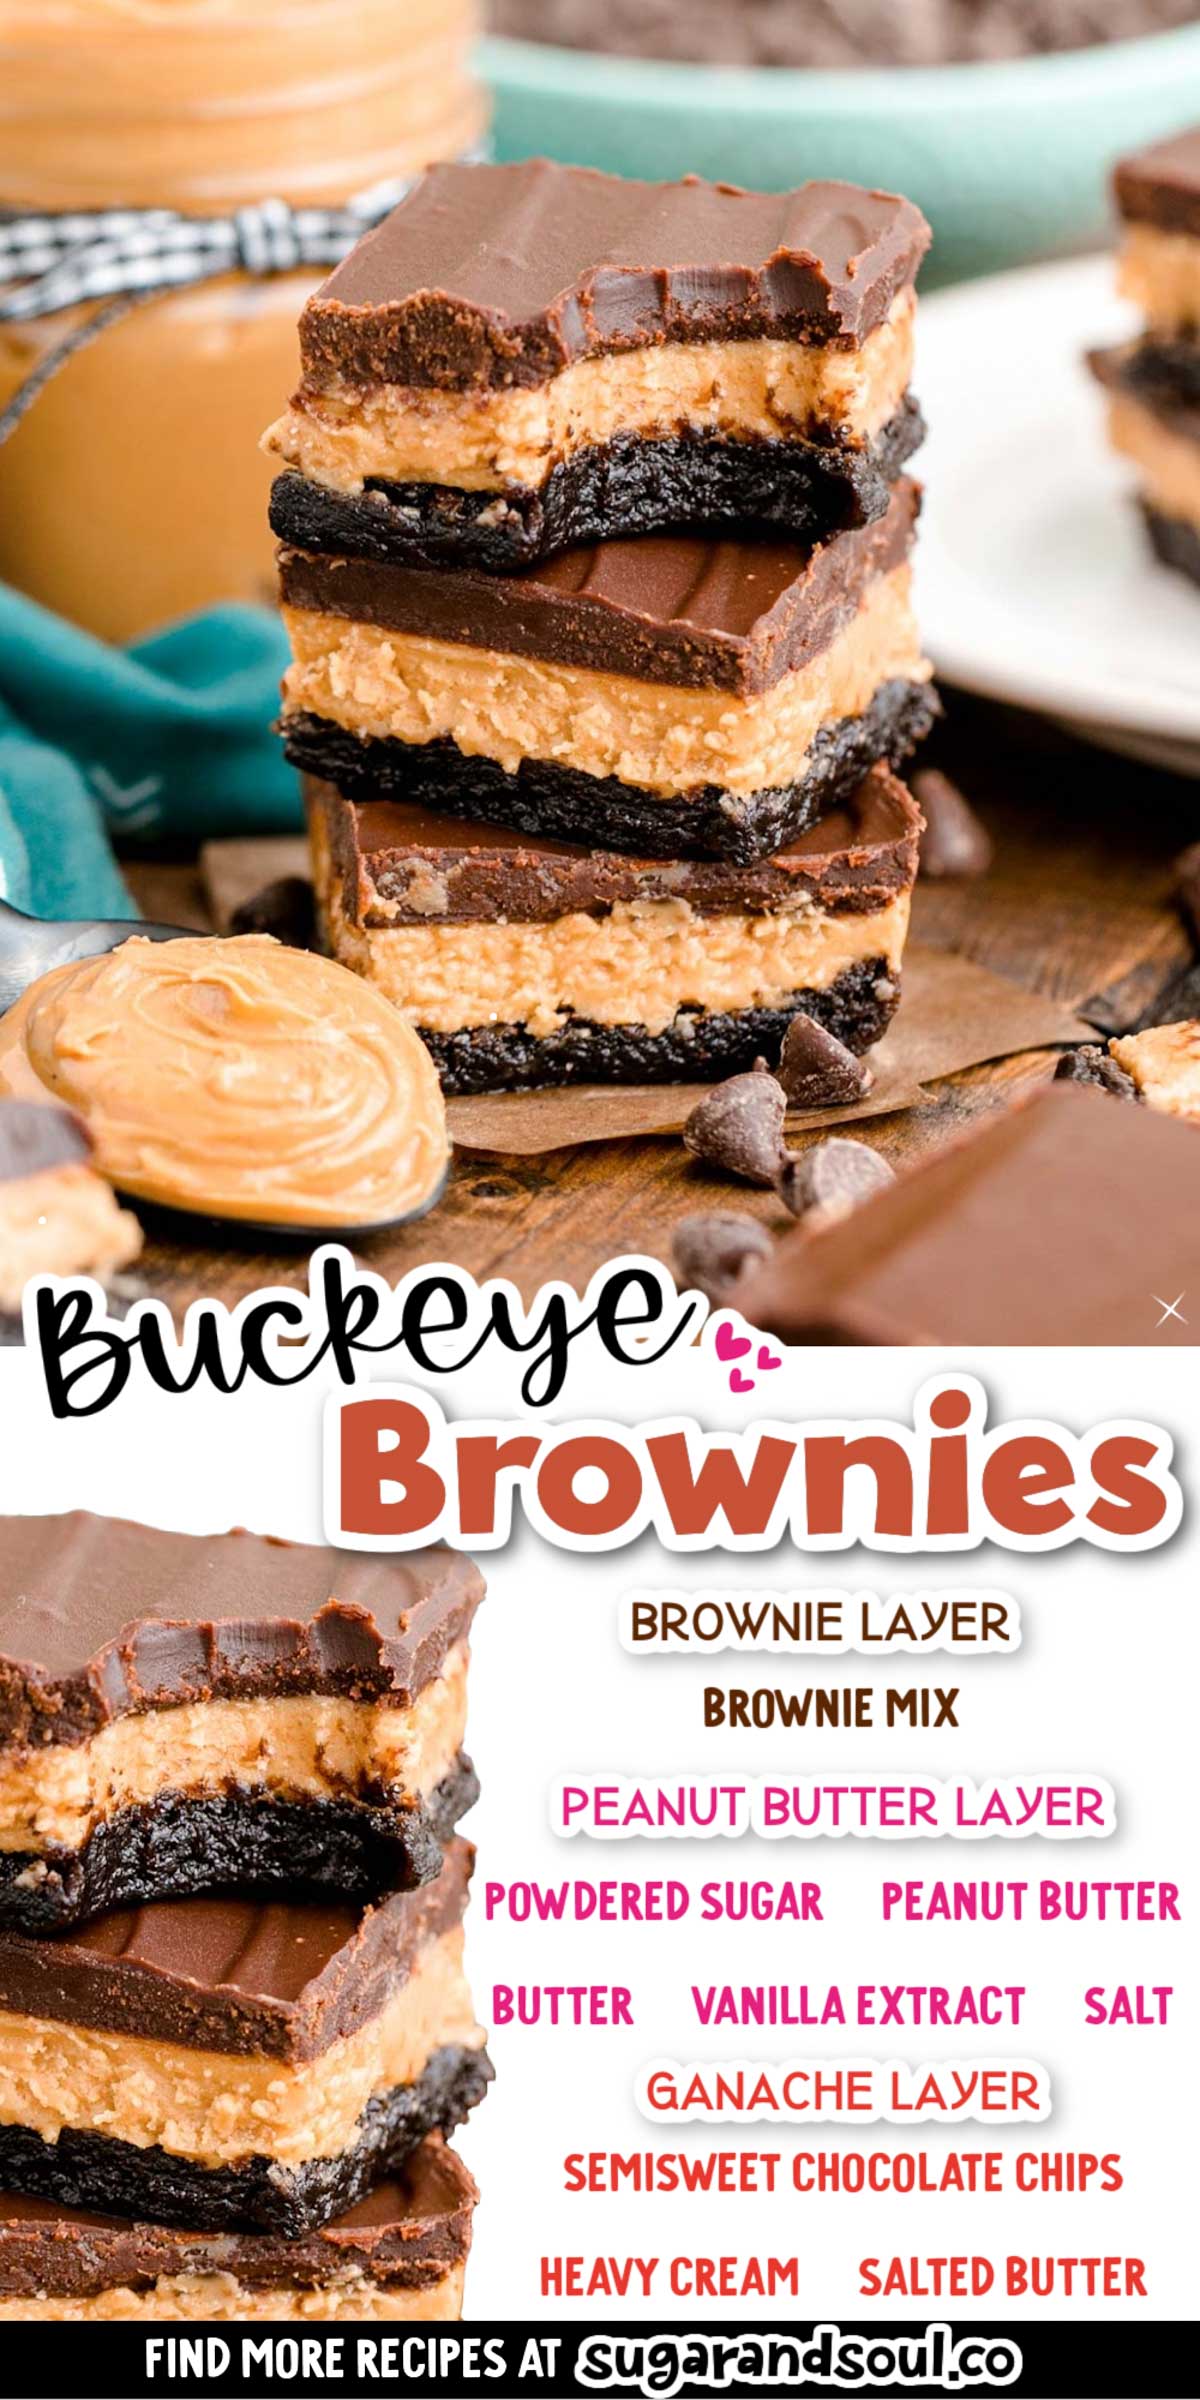 Buckeye Brownies are a rich and indulgent easy-to-make treat that has layers of chewy brownie, salty peanut butter, and smooth ganache! Prep this crowd-pleasing dessert in just 15 minutes! via @sugarandsoulco